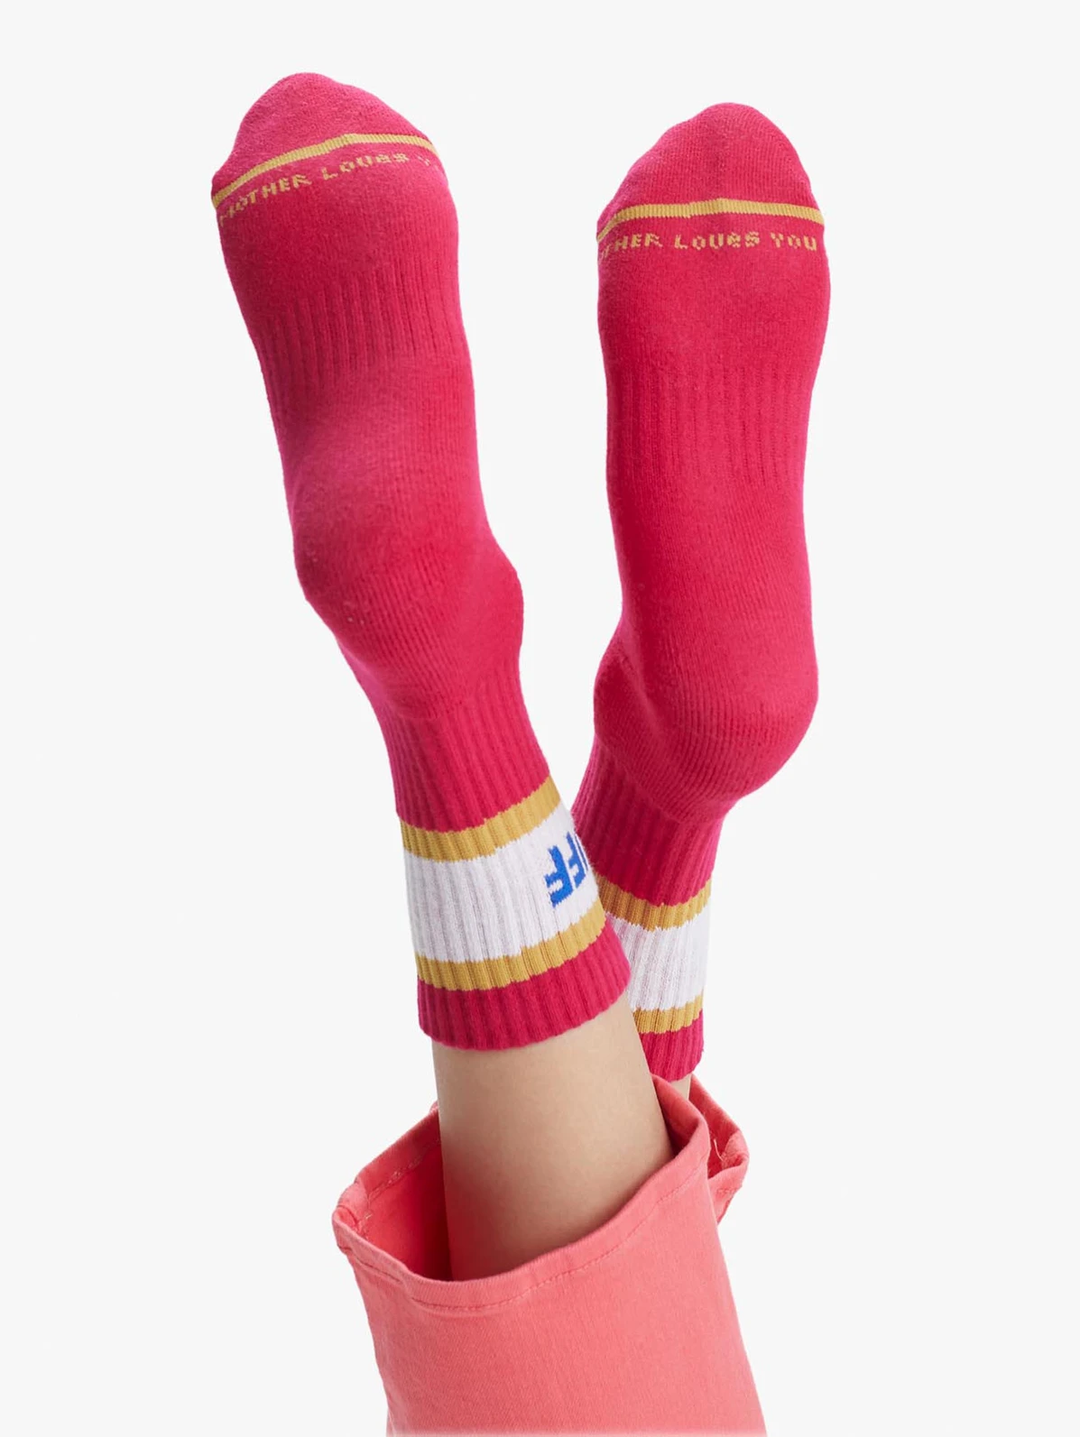 Mother - Baby Steps Socks in Love Stuff/Virtual Pink & Cream Gold